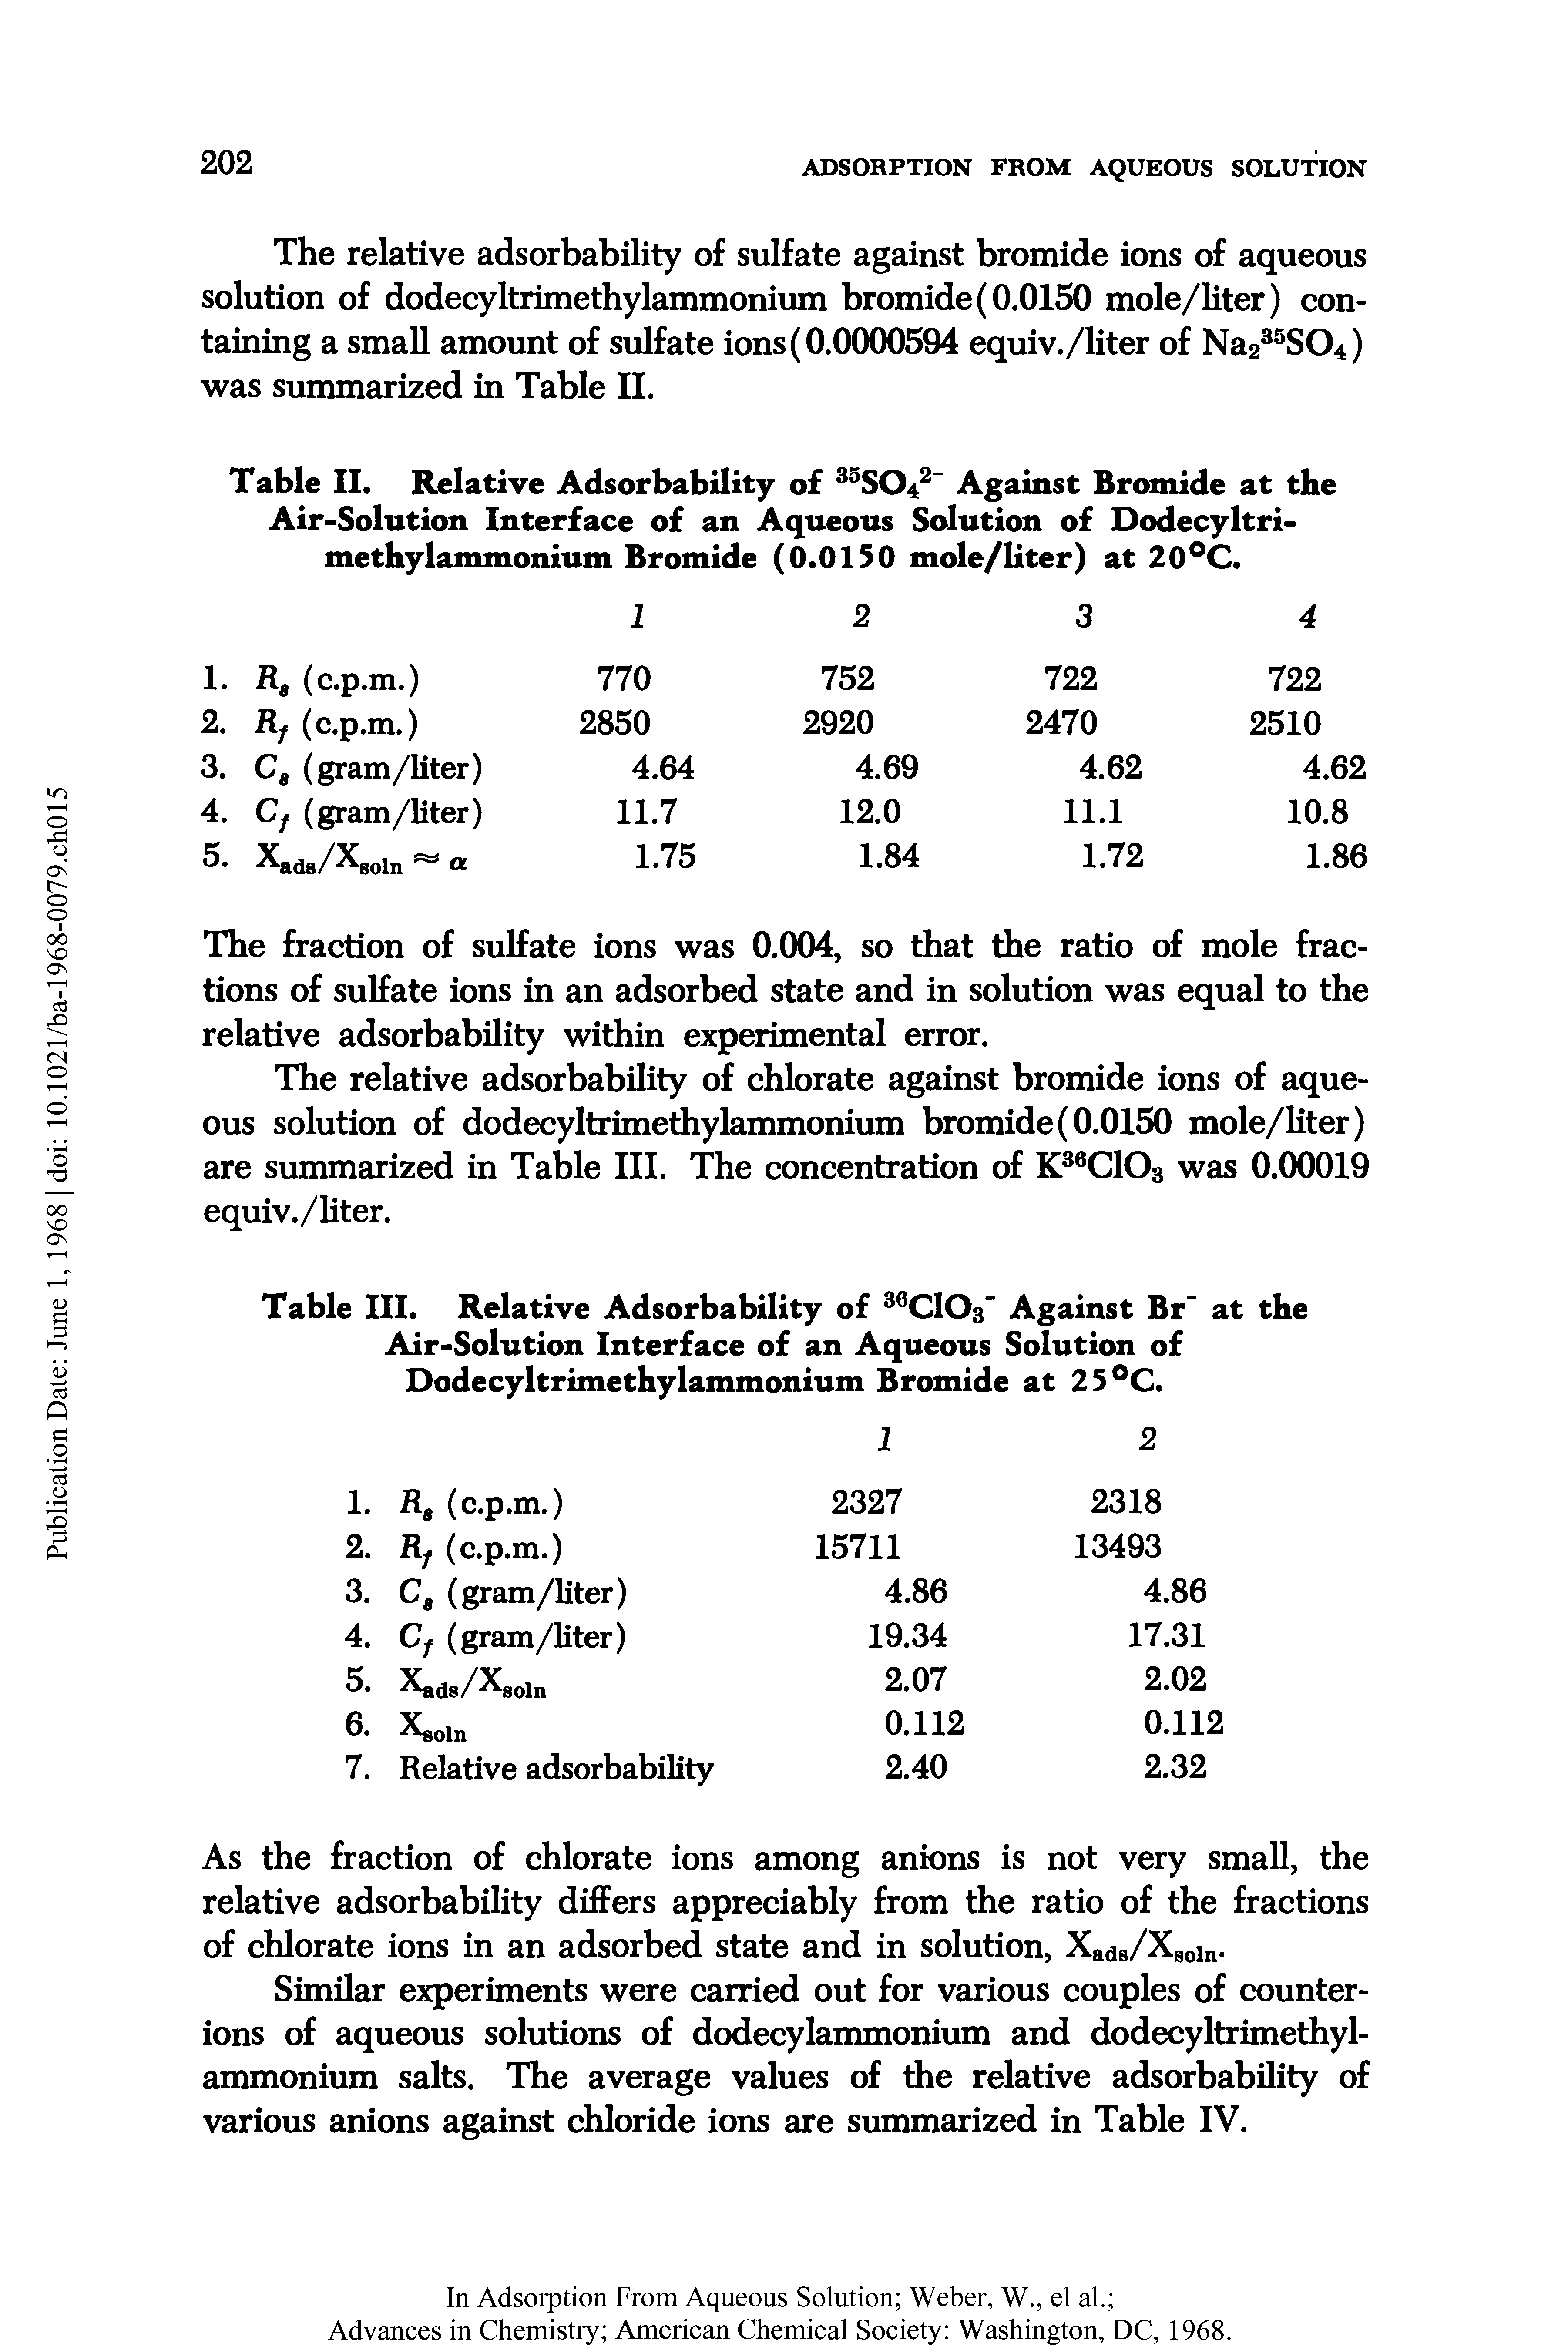 Table II. Relative Adsorbability of 33S042 Against Bromide at the Air-Solution Interface of an Aqueous Solution of Dodecyltrimethylammonium Bromide (0.0150 mole/liter) at 20°C.